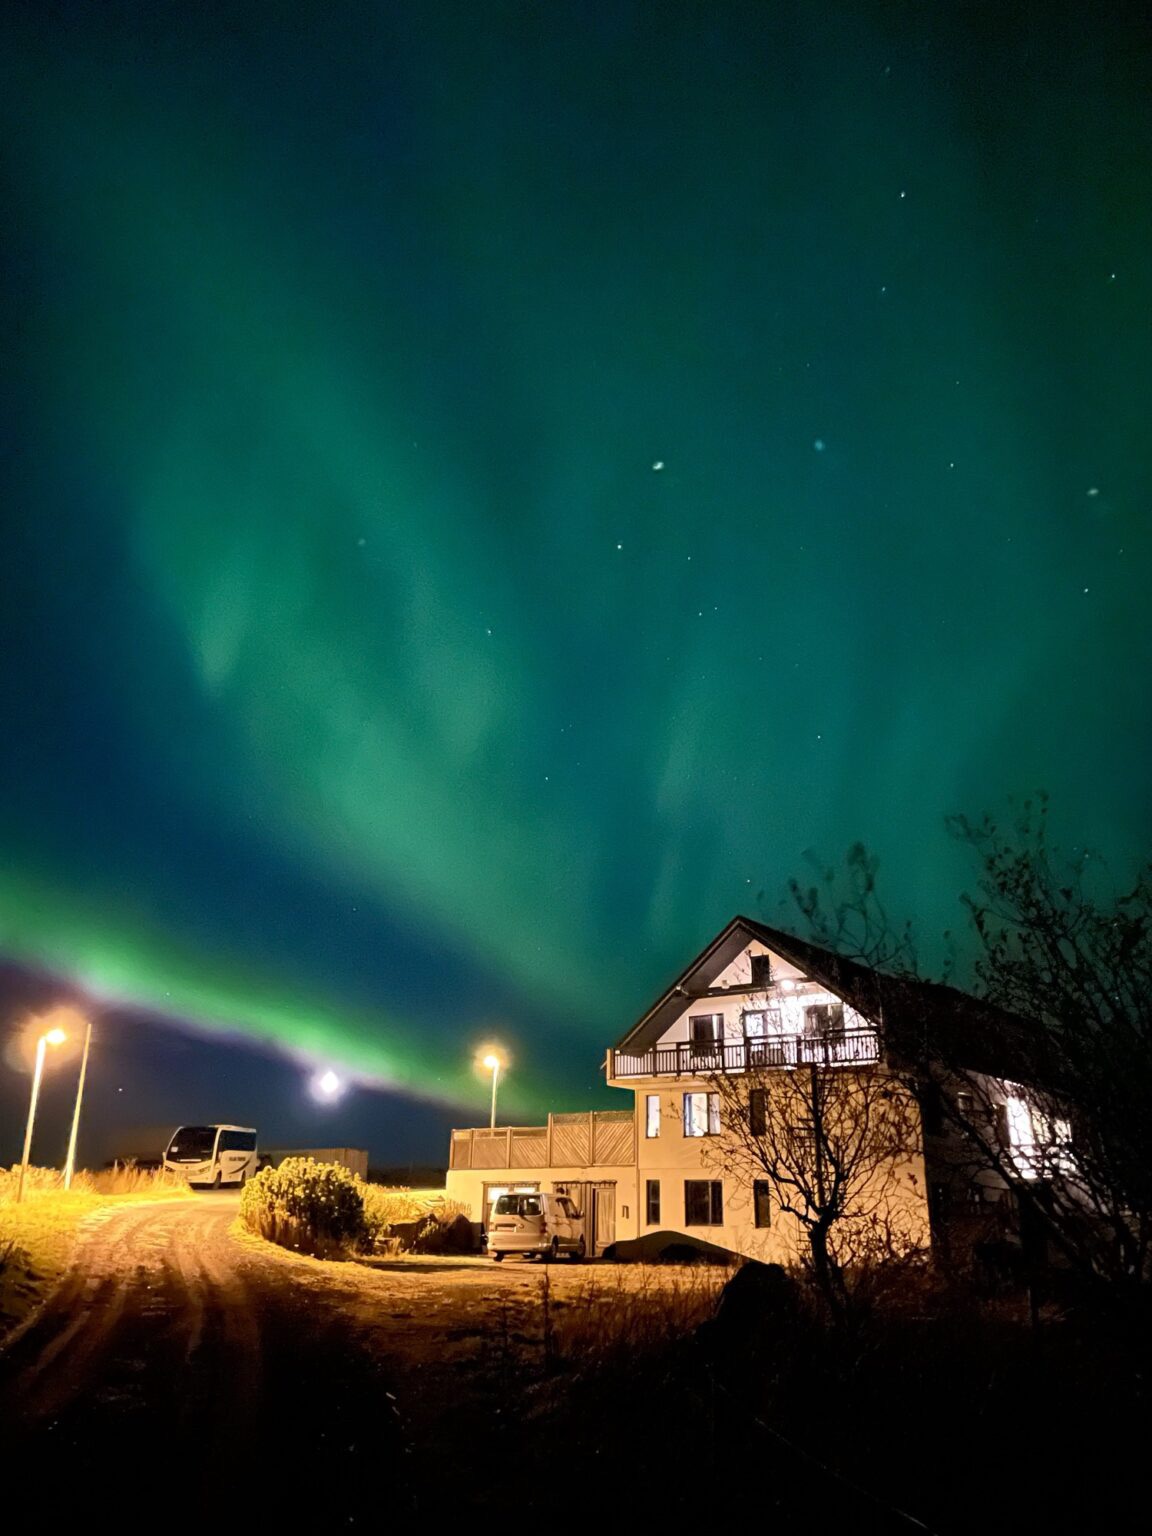 Green Northern Lights cover the sky over a house in Iceland.